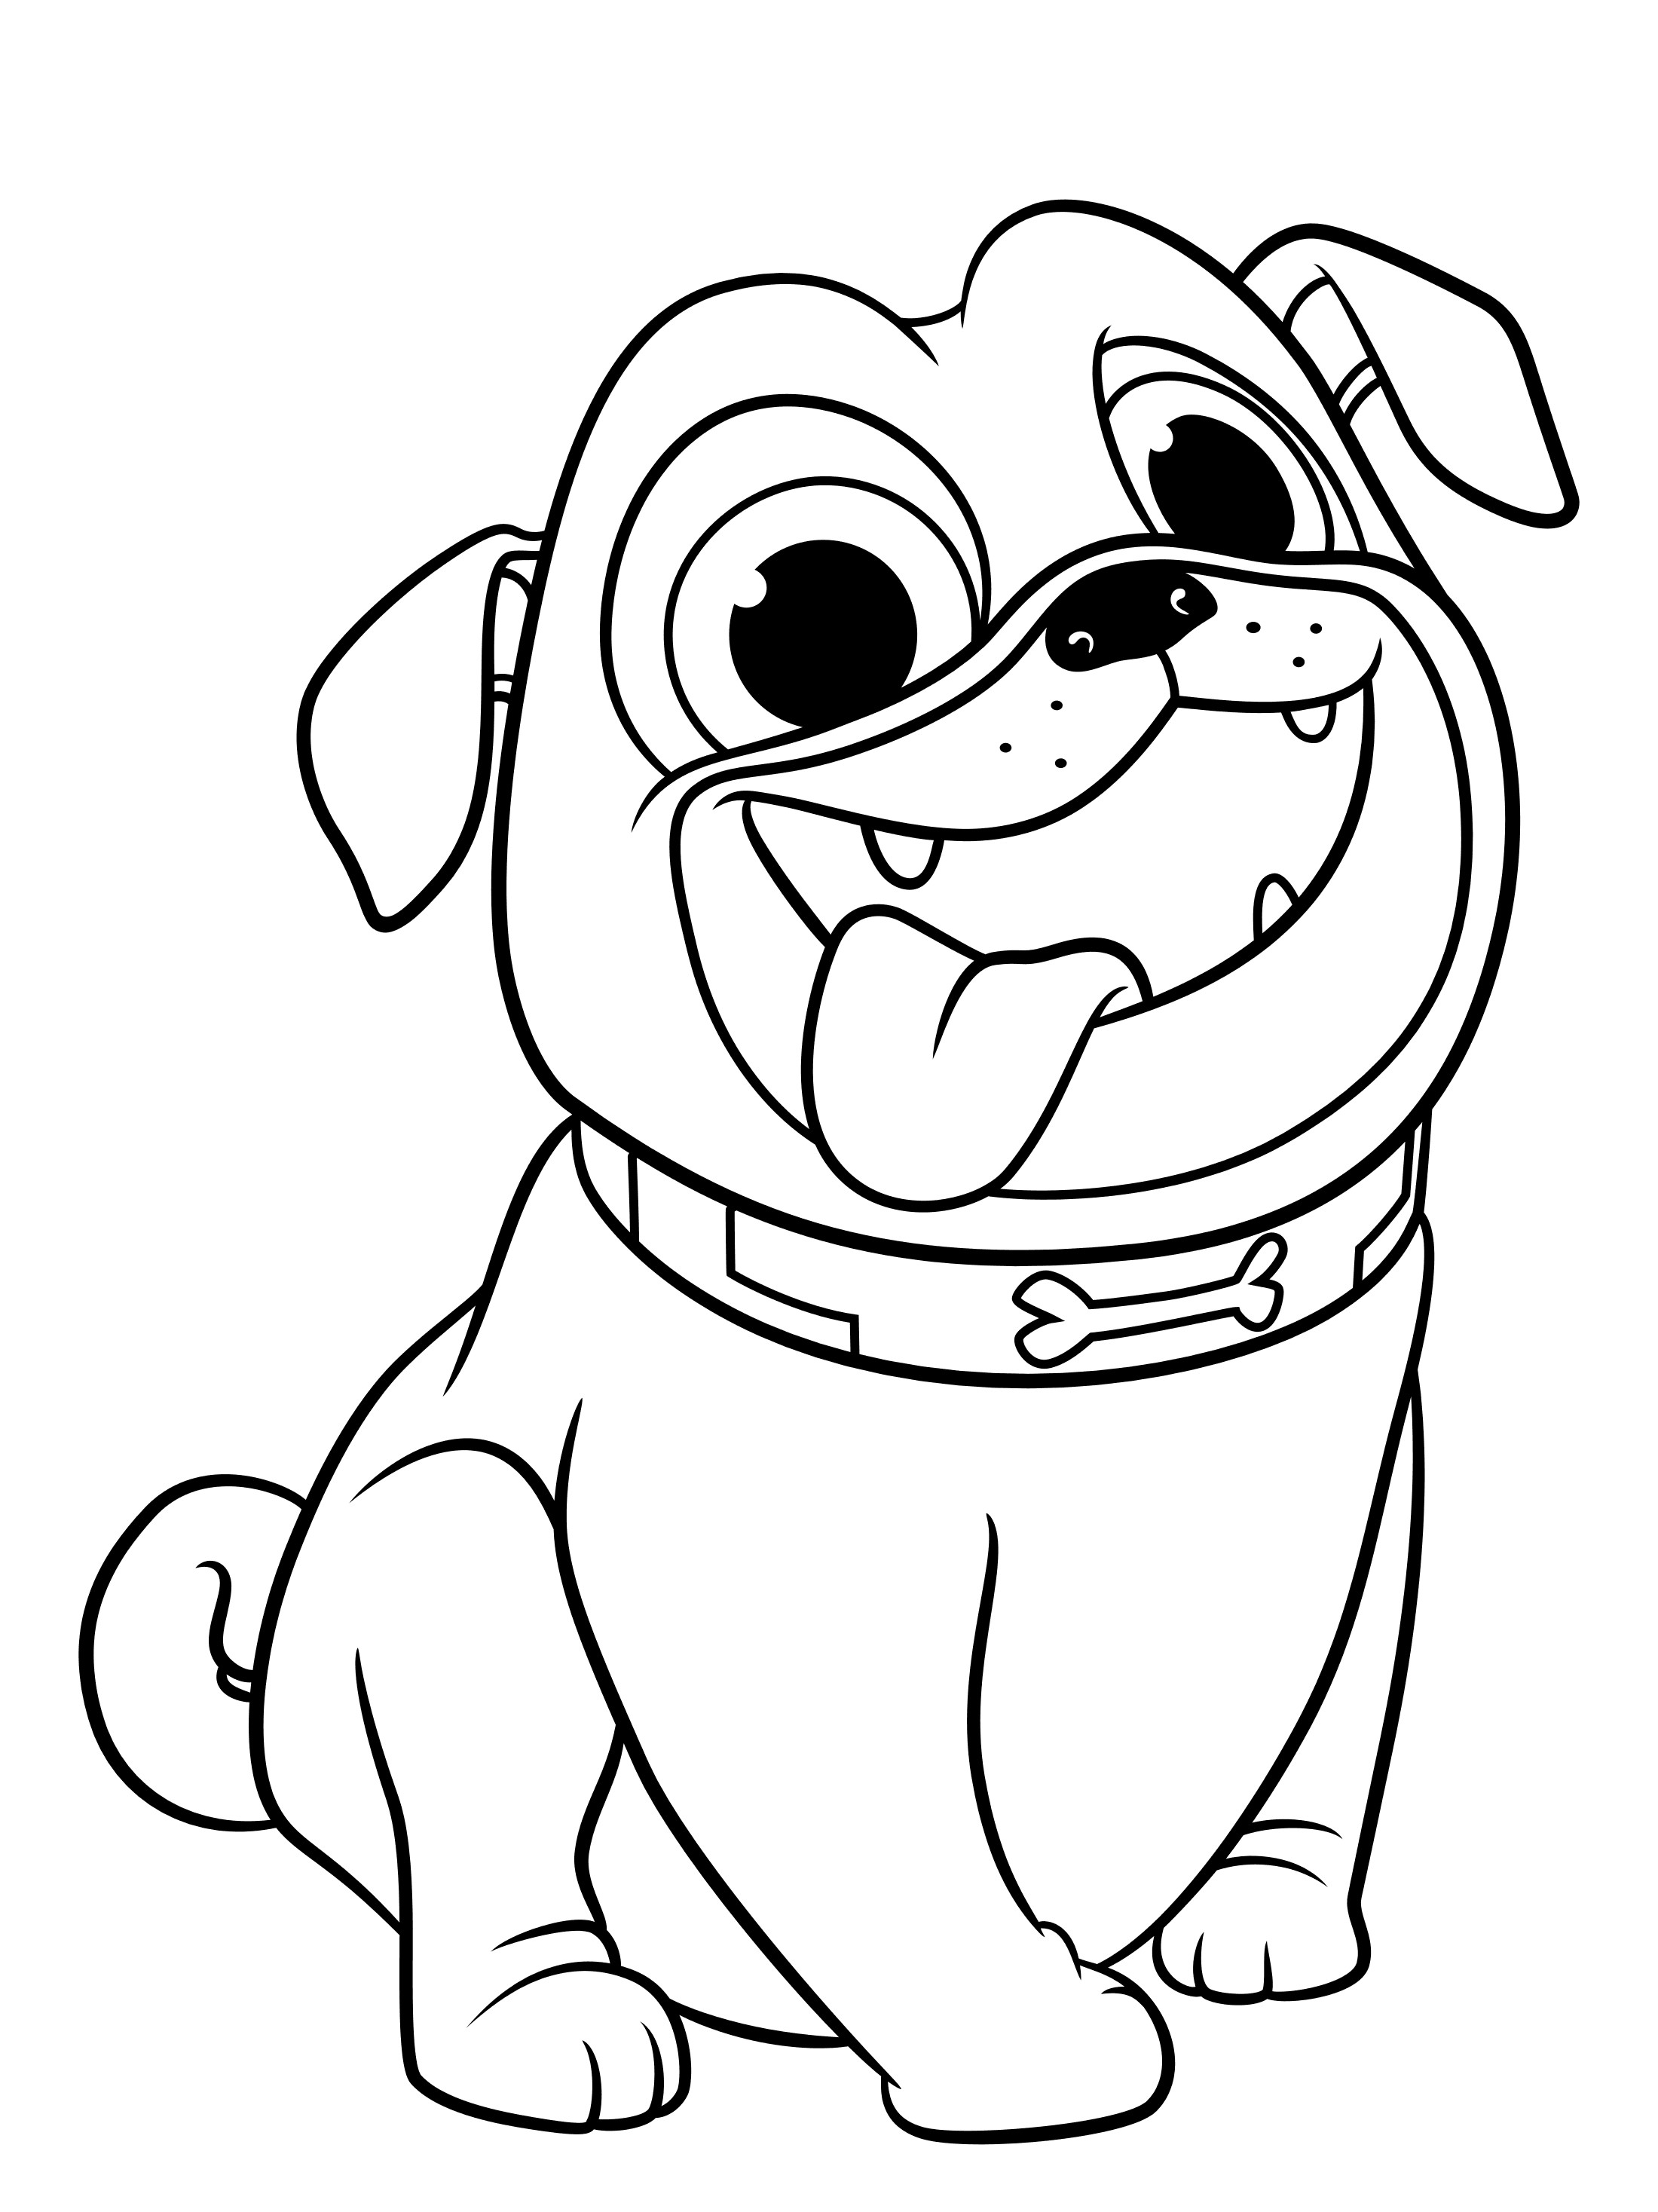 Pug Coloring Pages to download and print for free